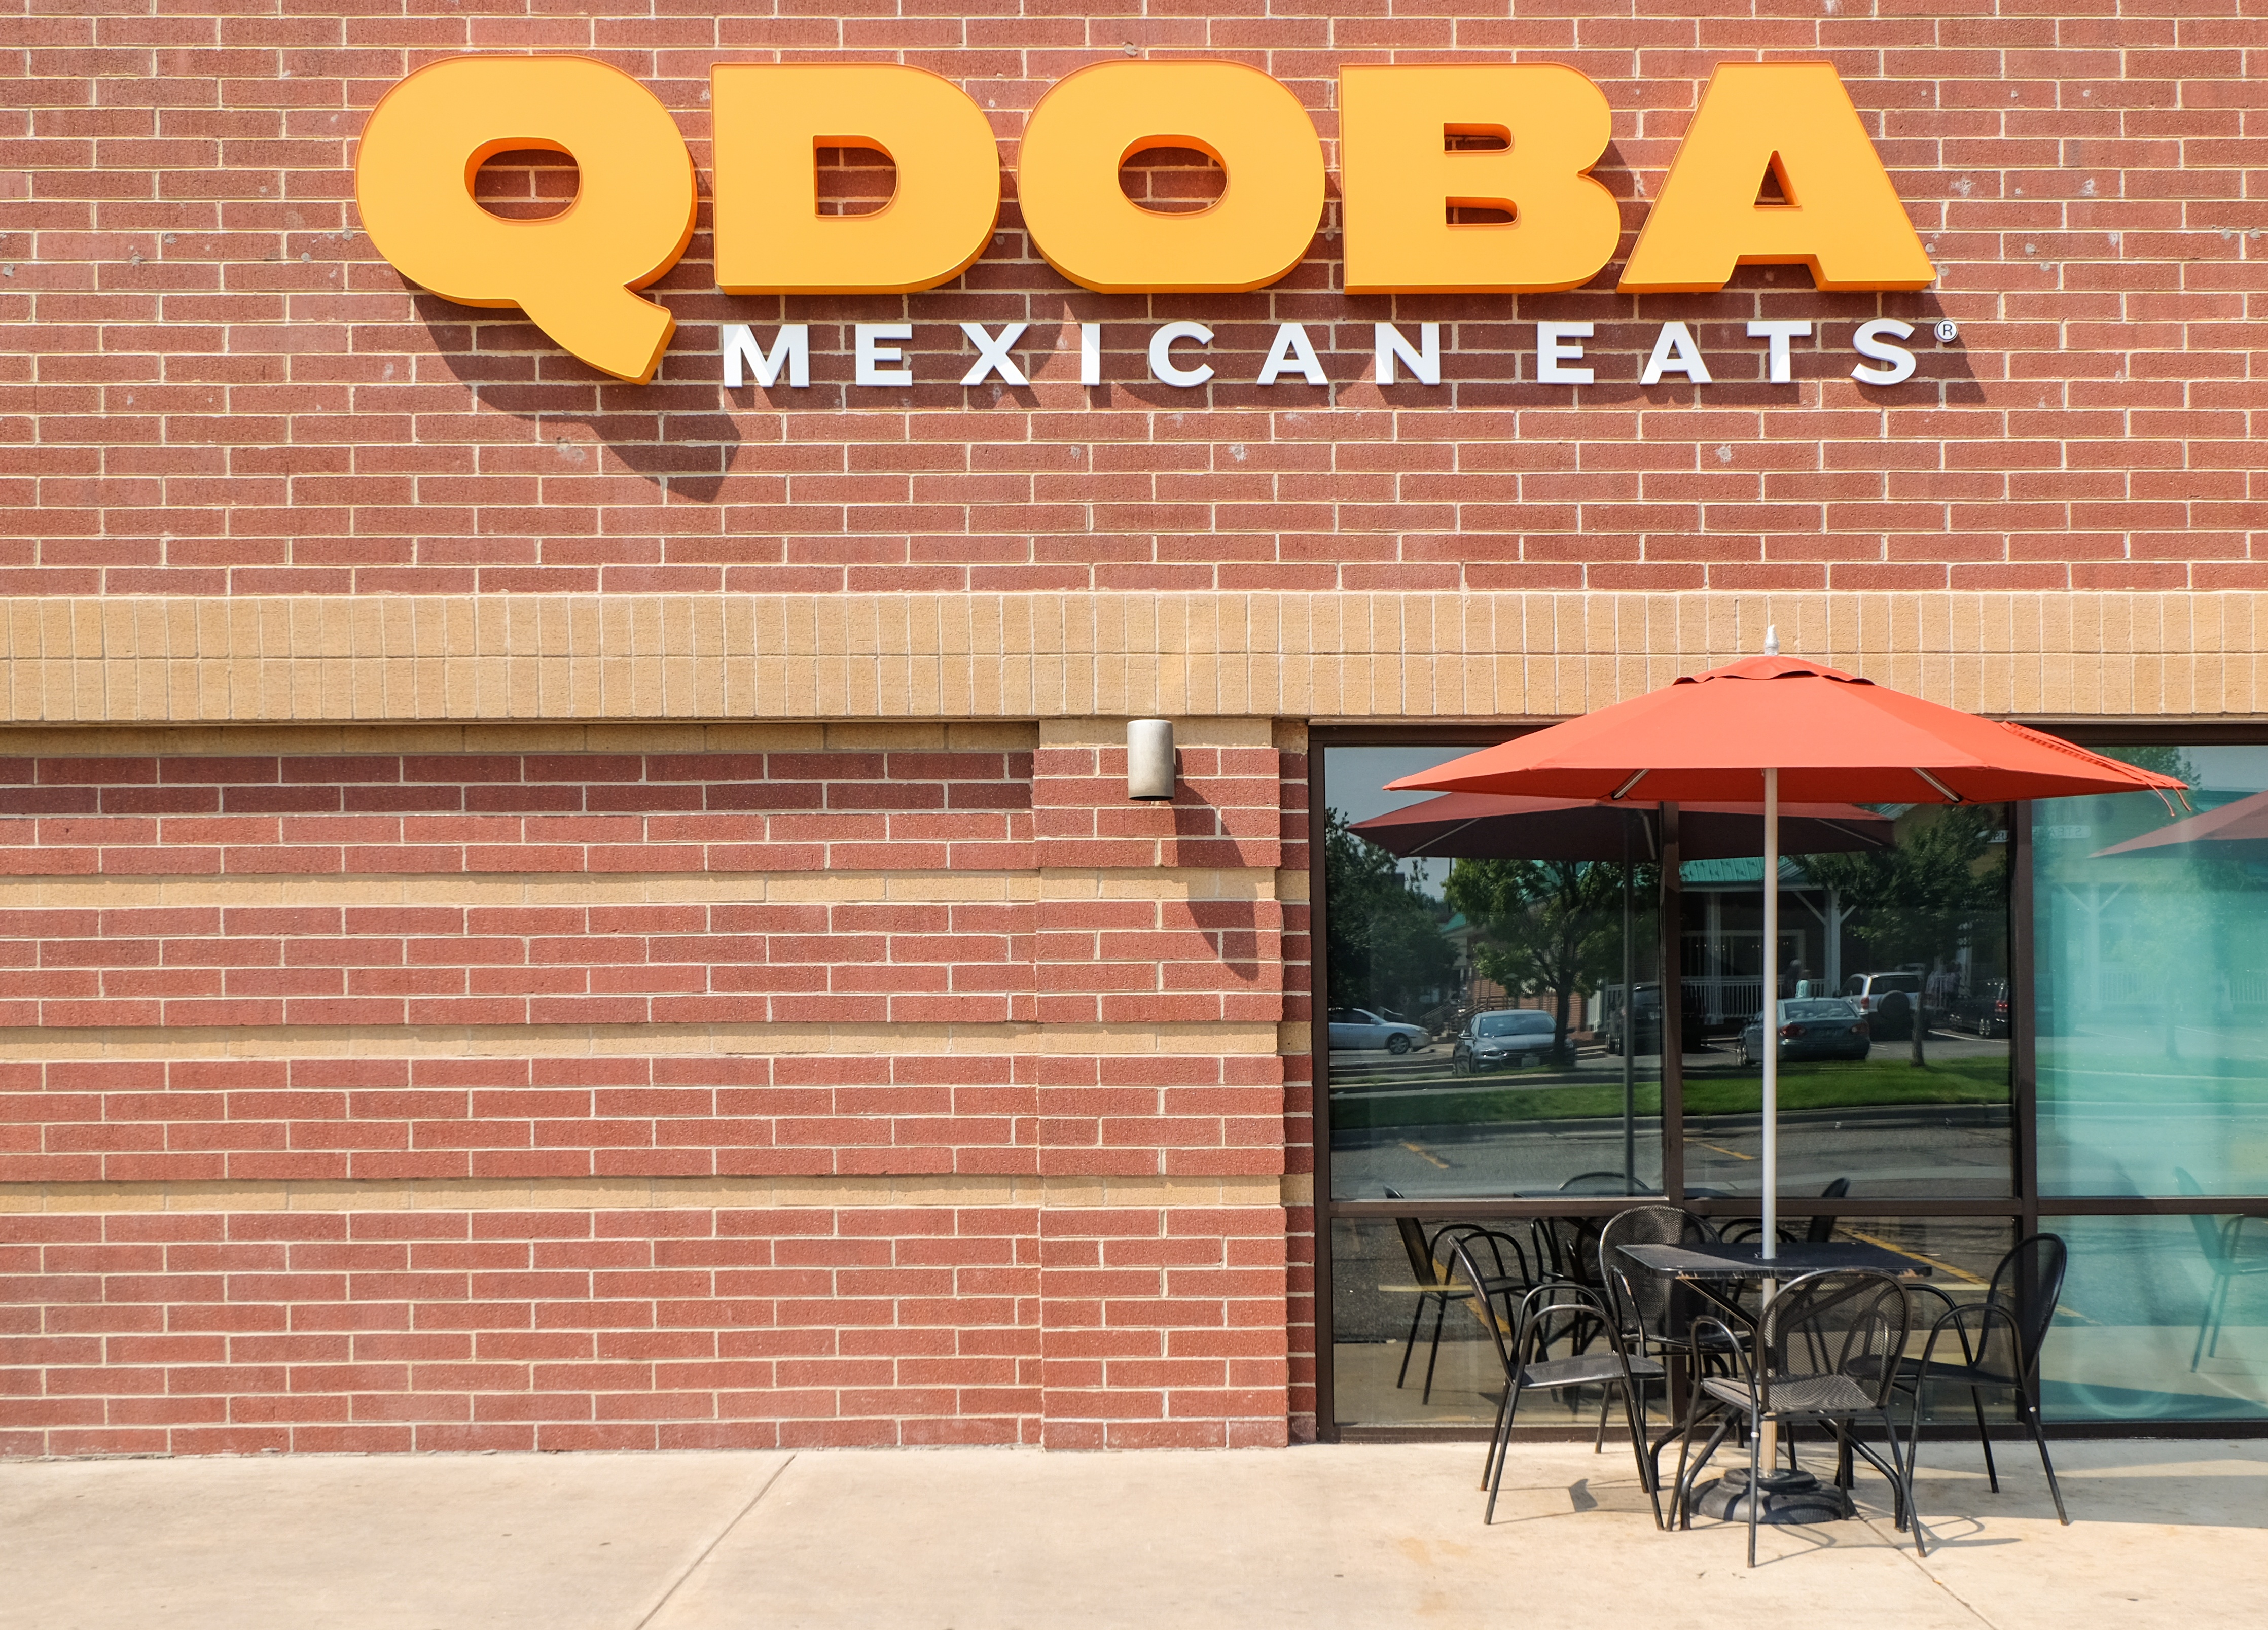 Qdoba signage on a brick wall with a table and chairs in front of it. 